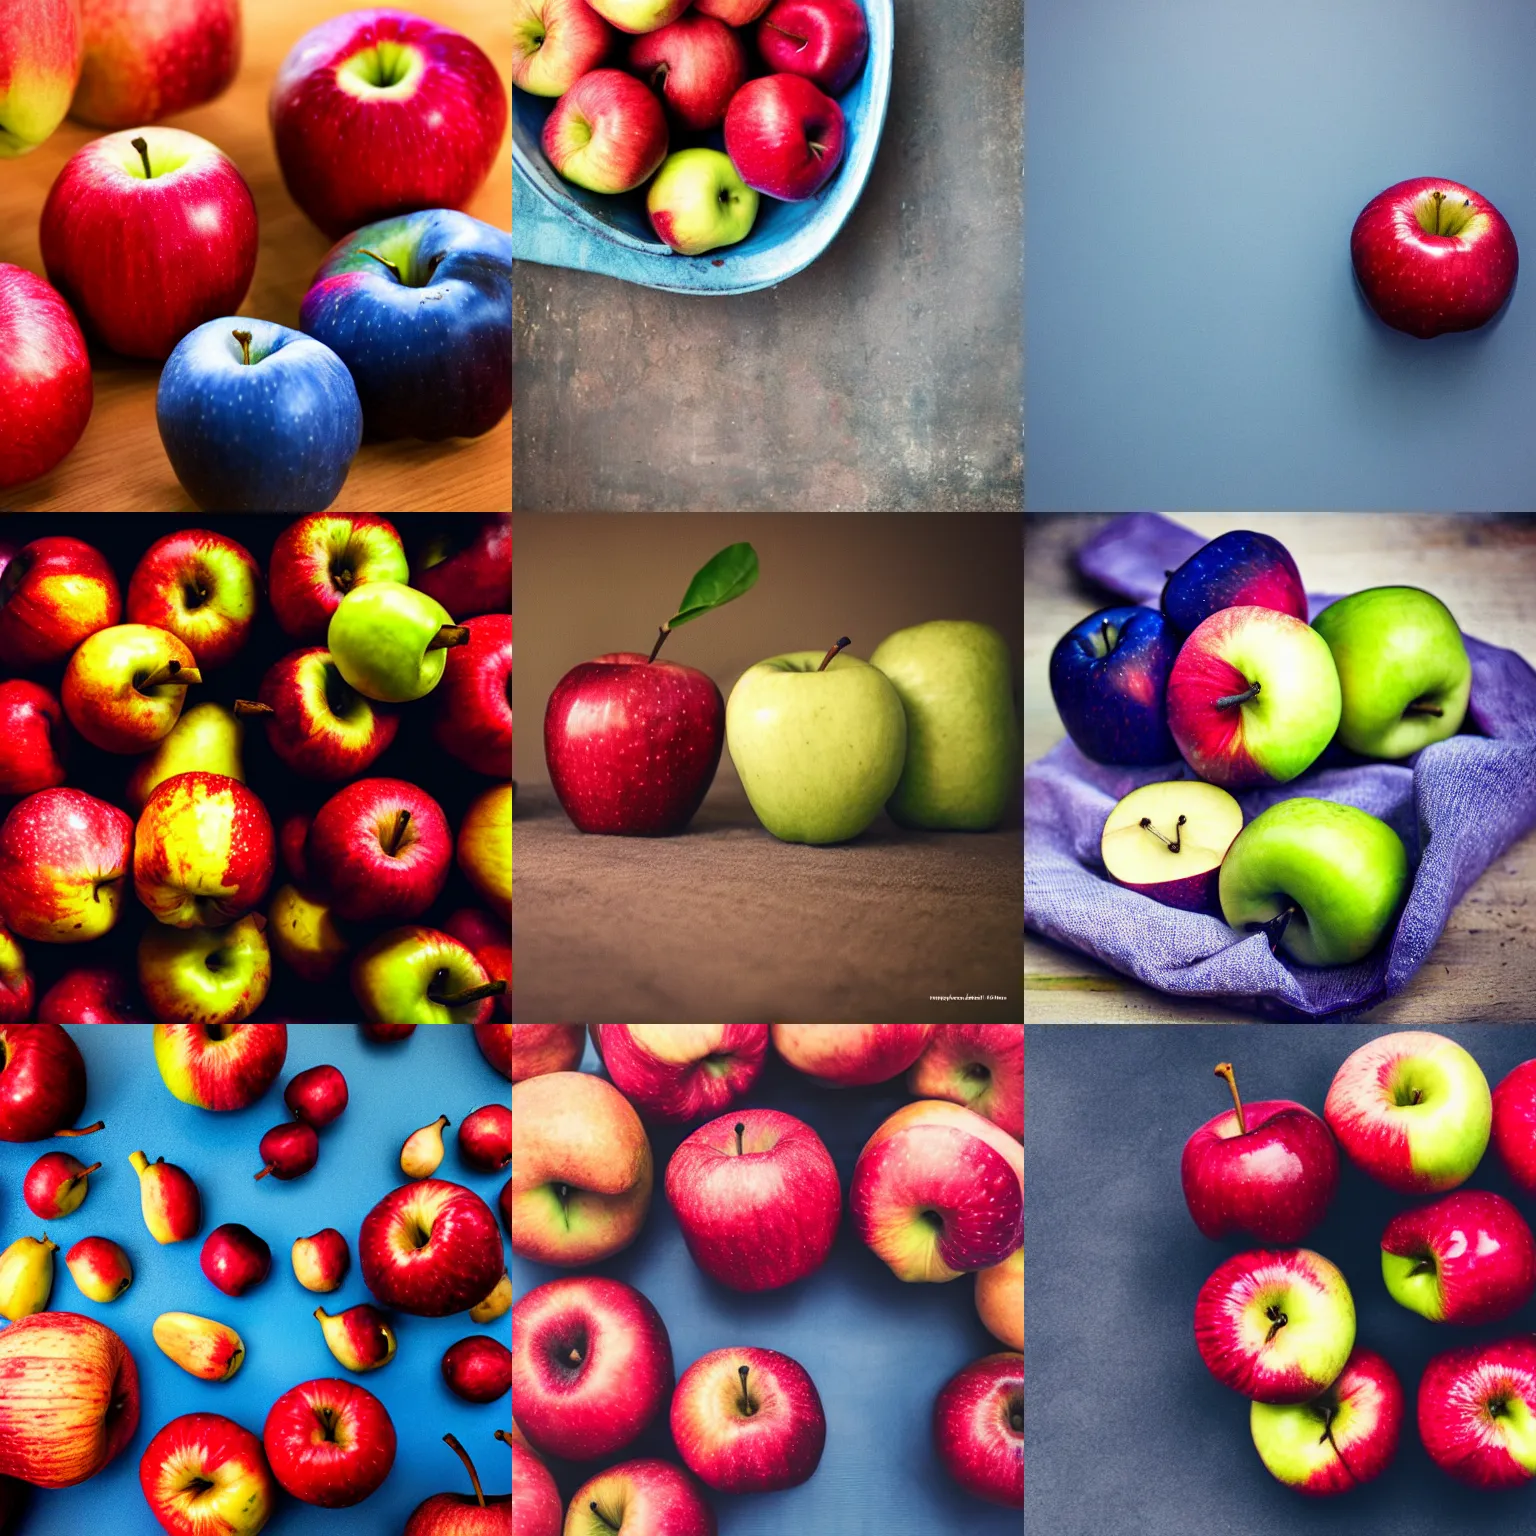 Prompt: blues apples and red bananas, photography